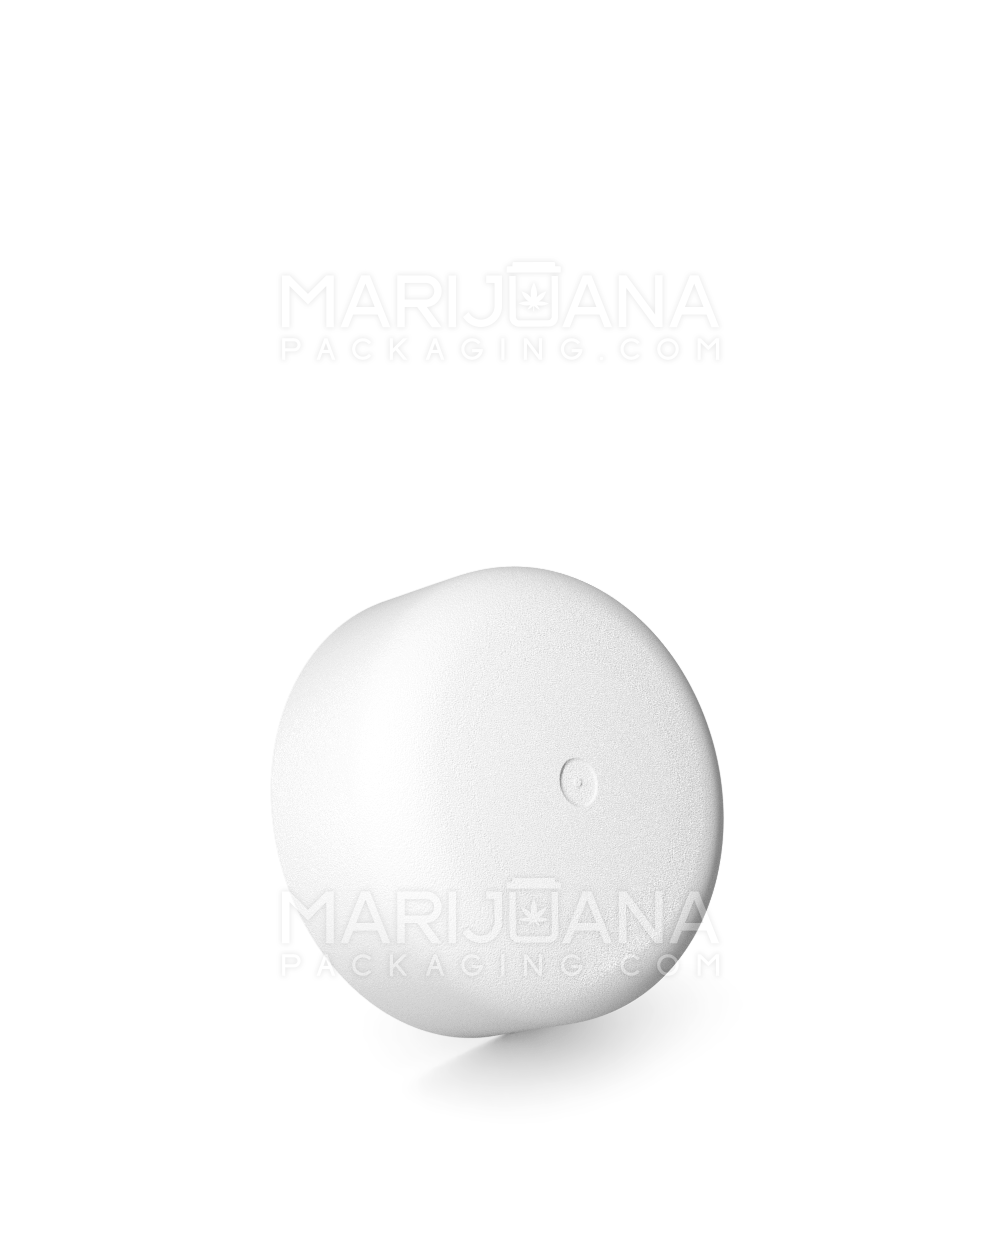 Child Resistant | Smooth Push Down & Turn Plastic Caps w/ Foam Liner | 28mm - Matte White - 504 Count - 1